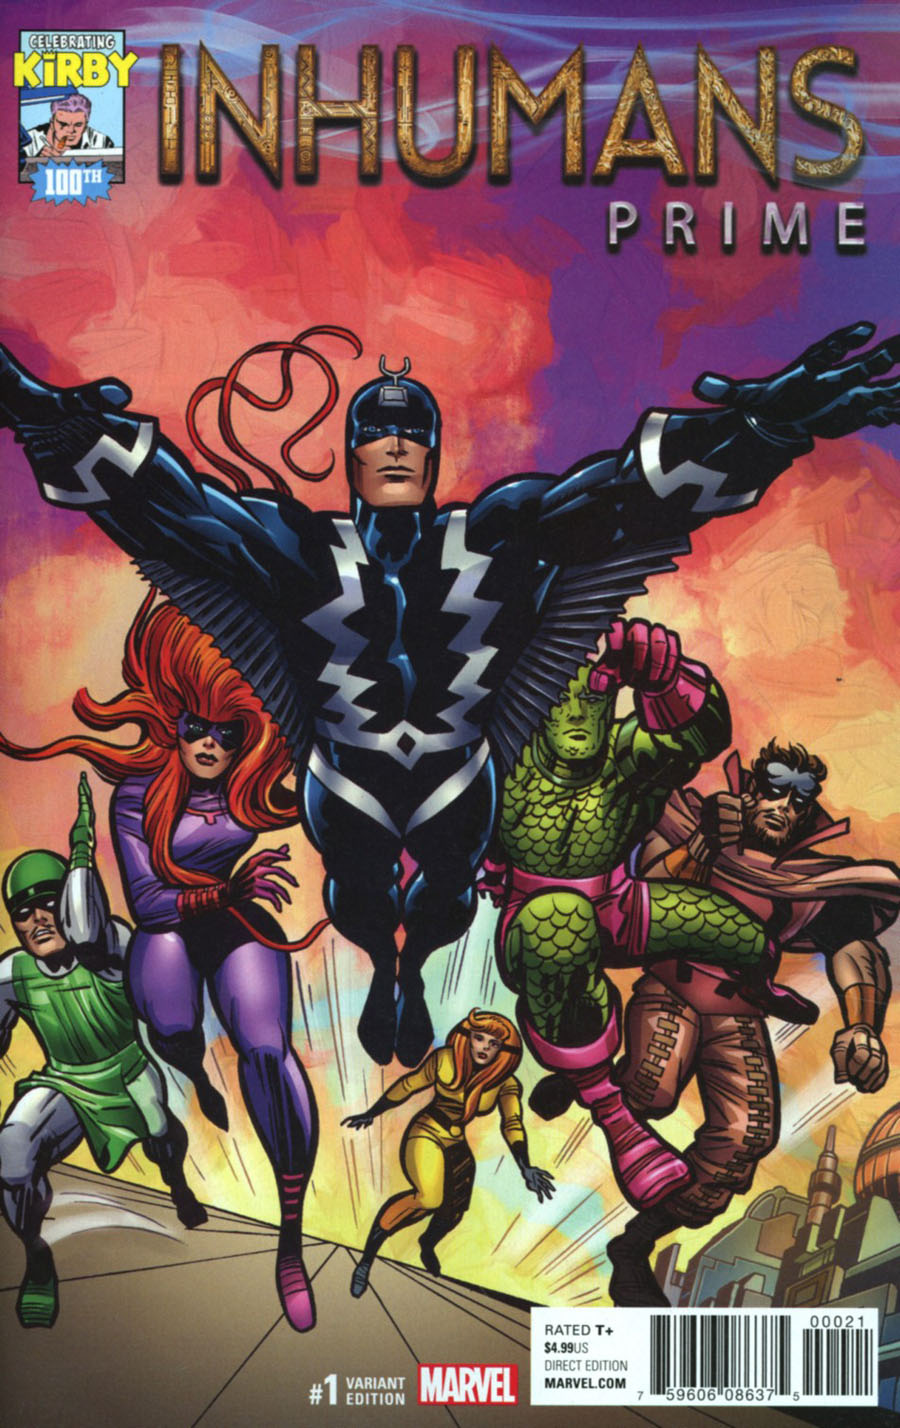 Inhumans Prime #1 Cover E Incentive Jack Kirby 100th Anniversary Variant Cover (Resurrxion Tie-In)